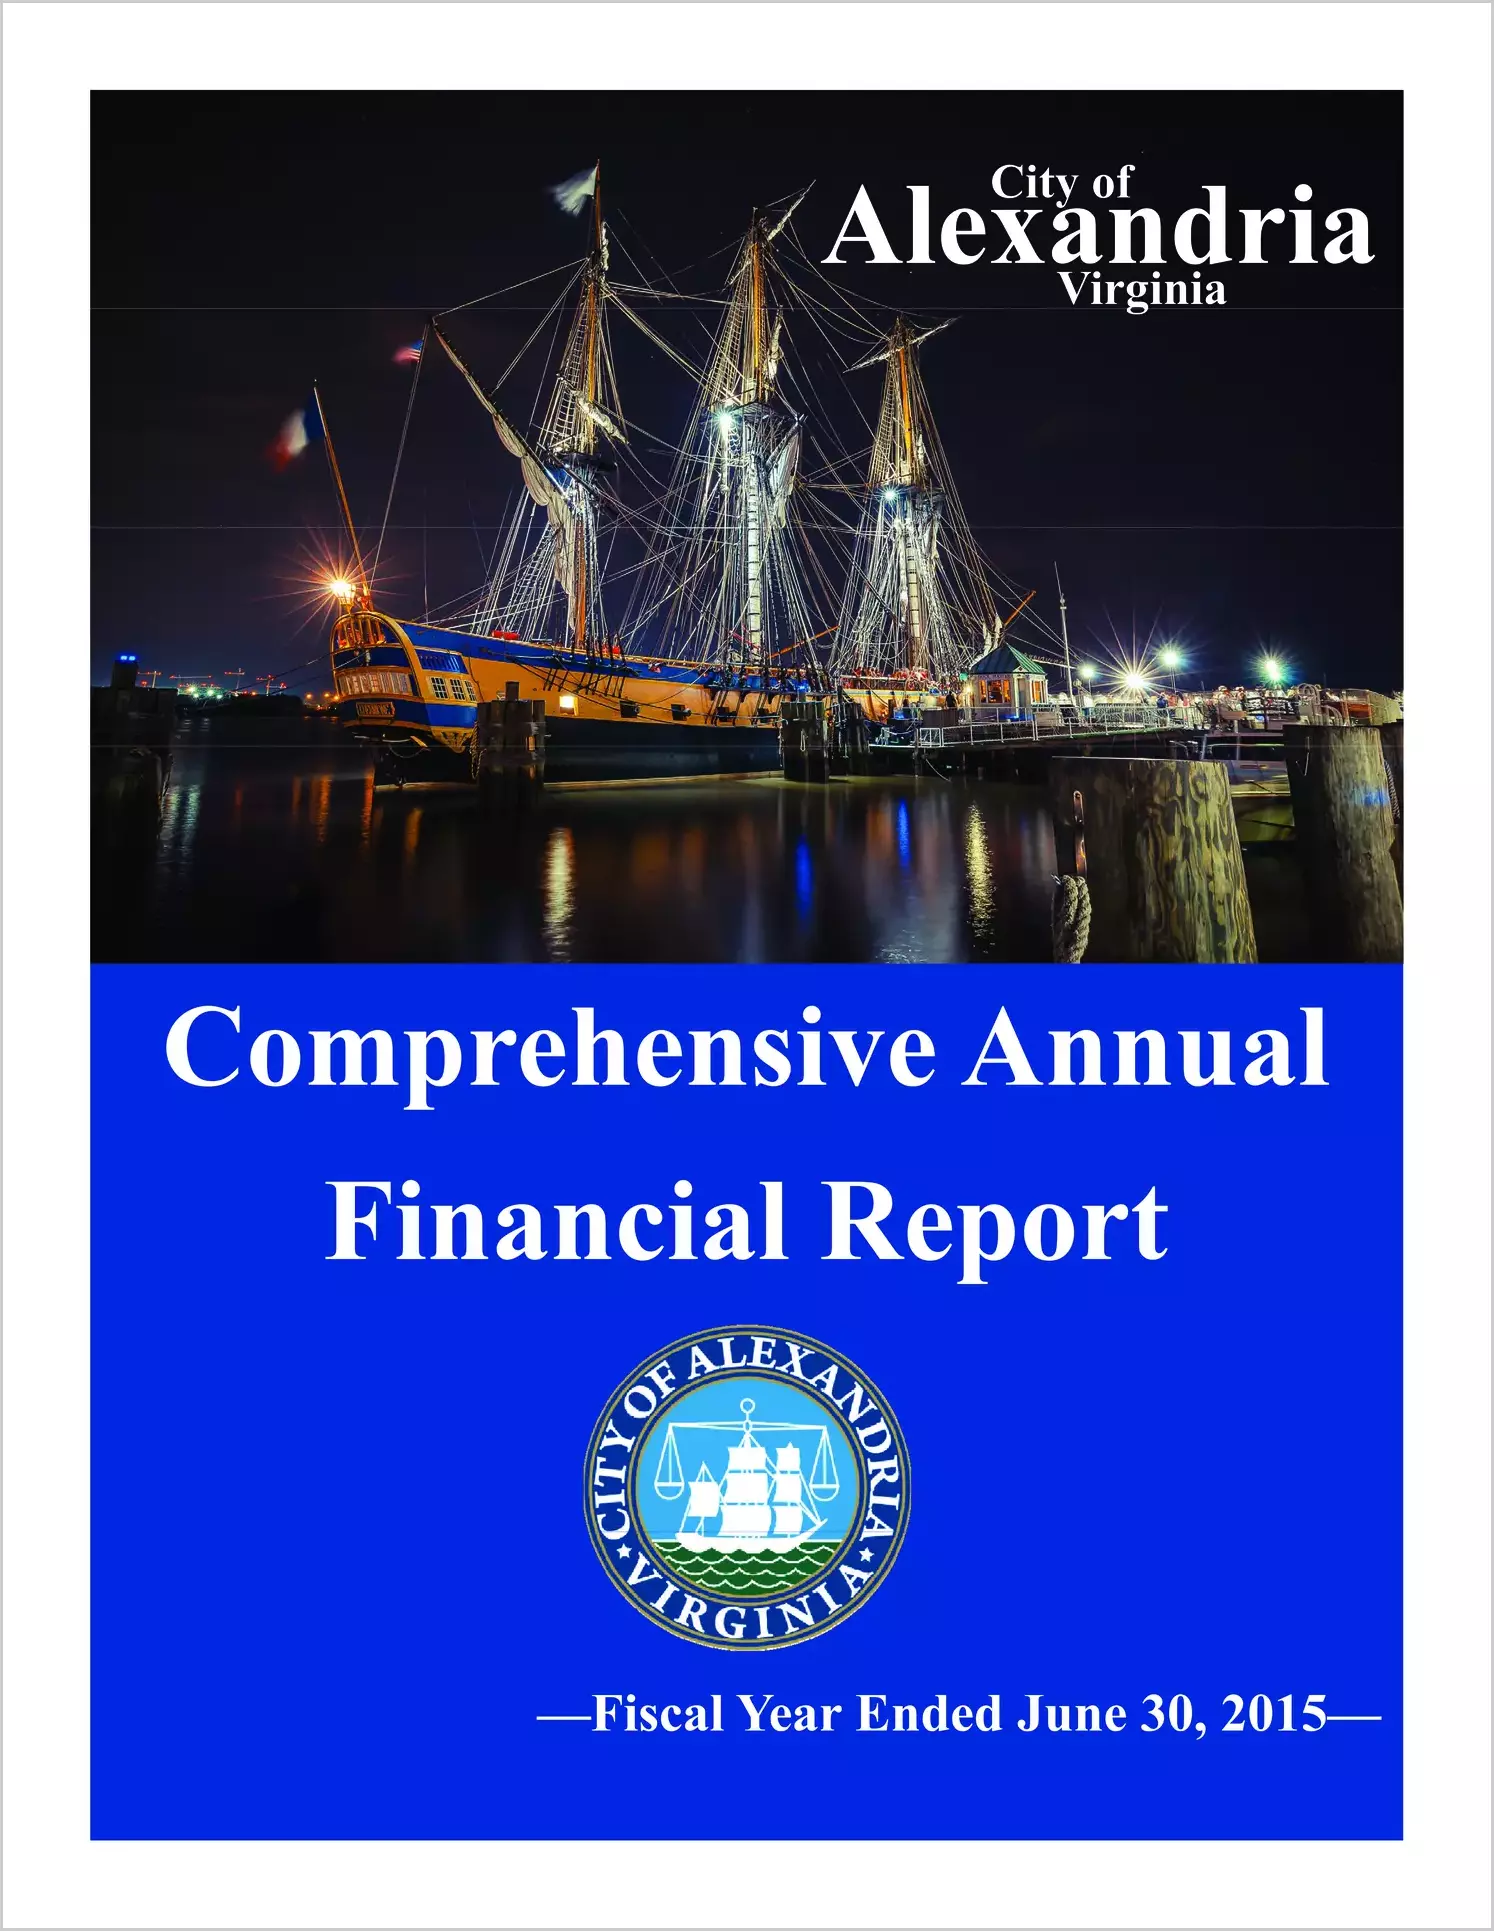 2015 Annual Financial Report for City of Alexandria